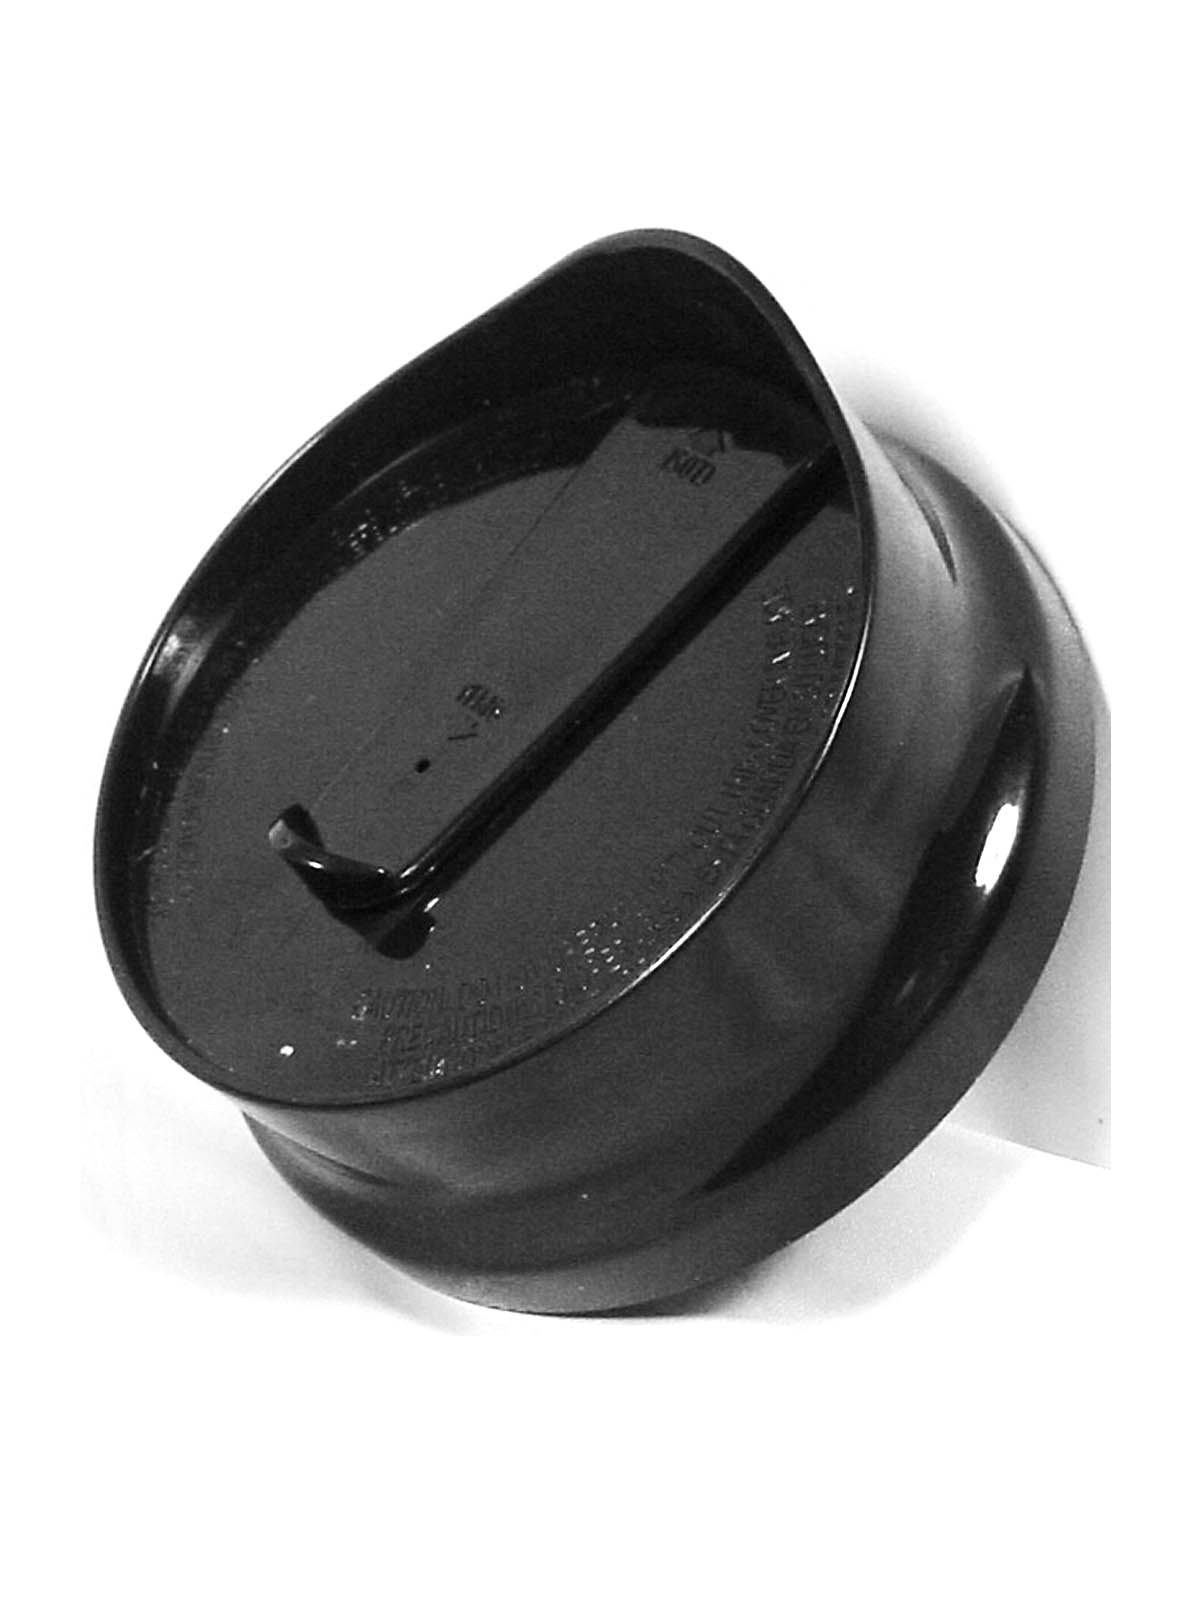 Get parts for Drinking Lid, blk